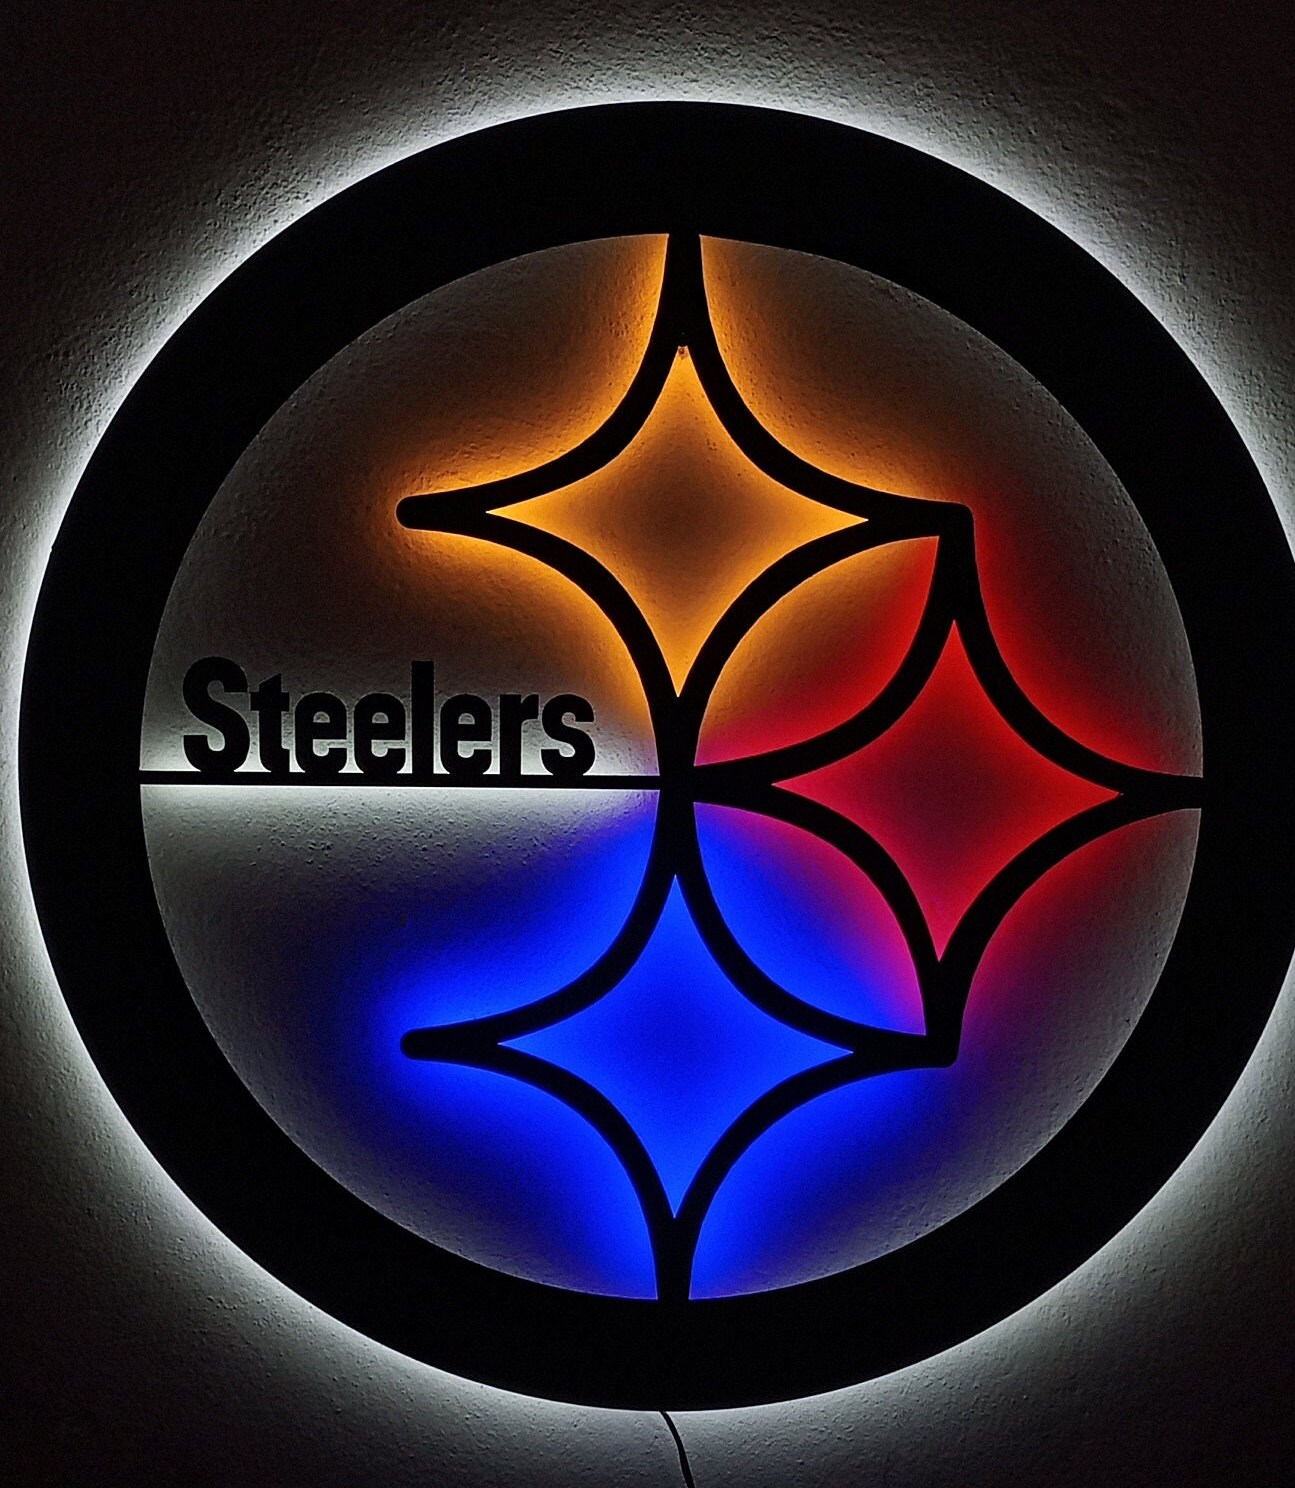 Buy Steelers Signs Online In India - Etsy India